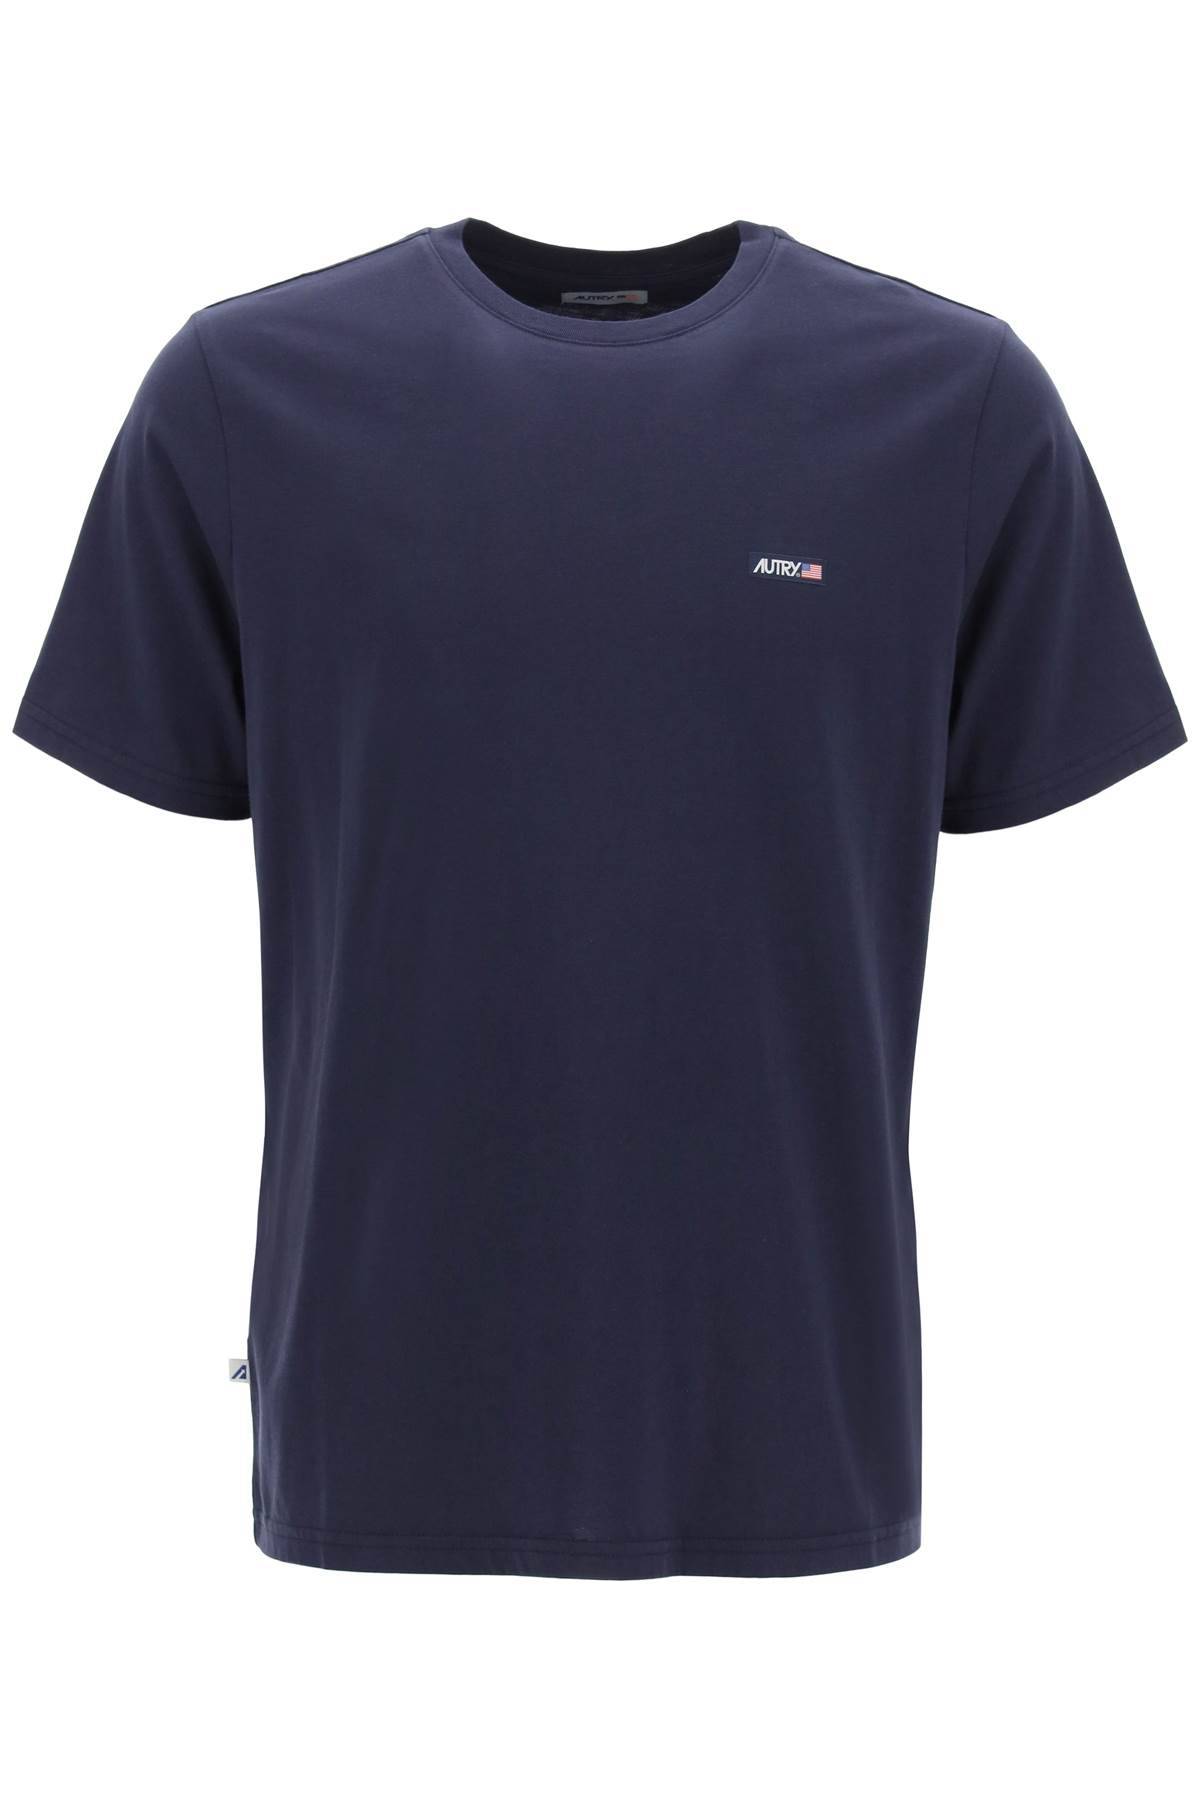 AUTRY AUTRY t-shirt with logo label